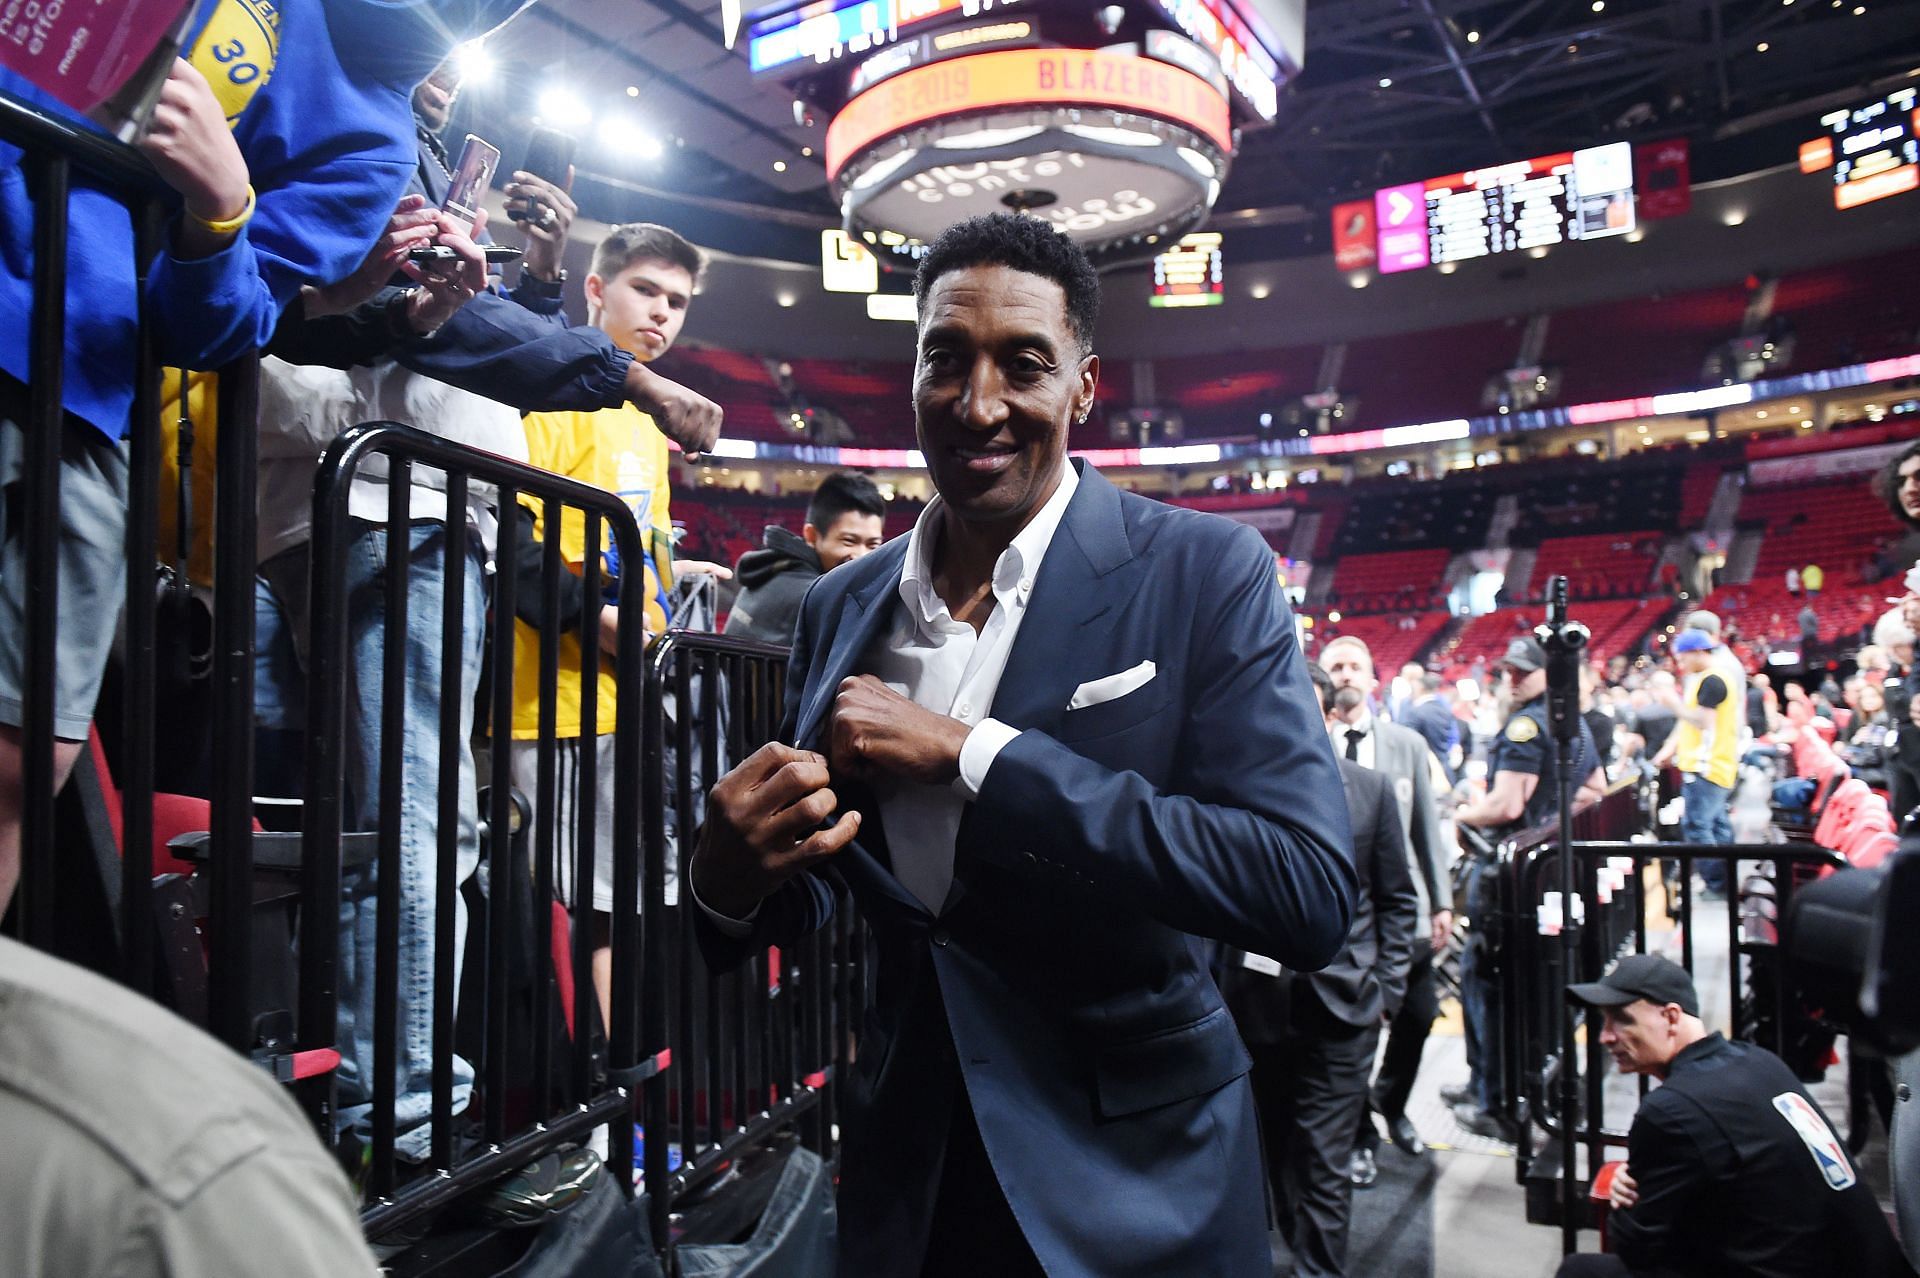 Scottie Pippen was a 7-time NBA All-Star and 6-time NBA champion